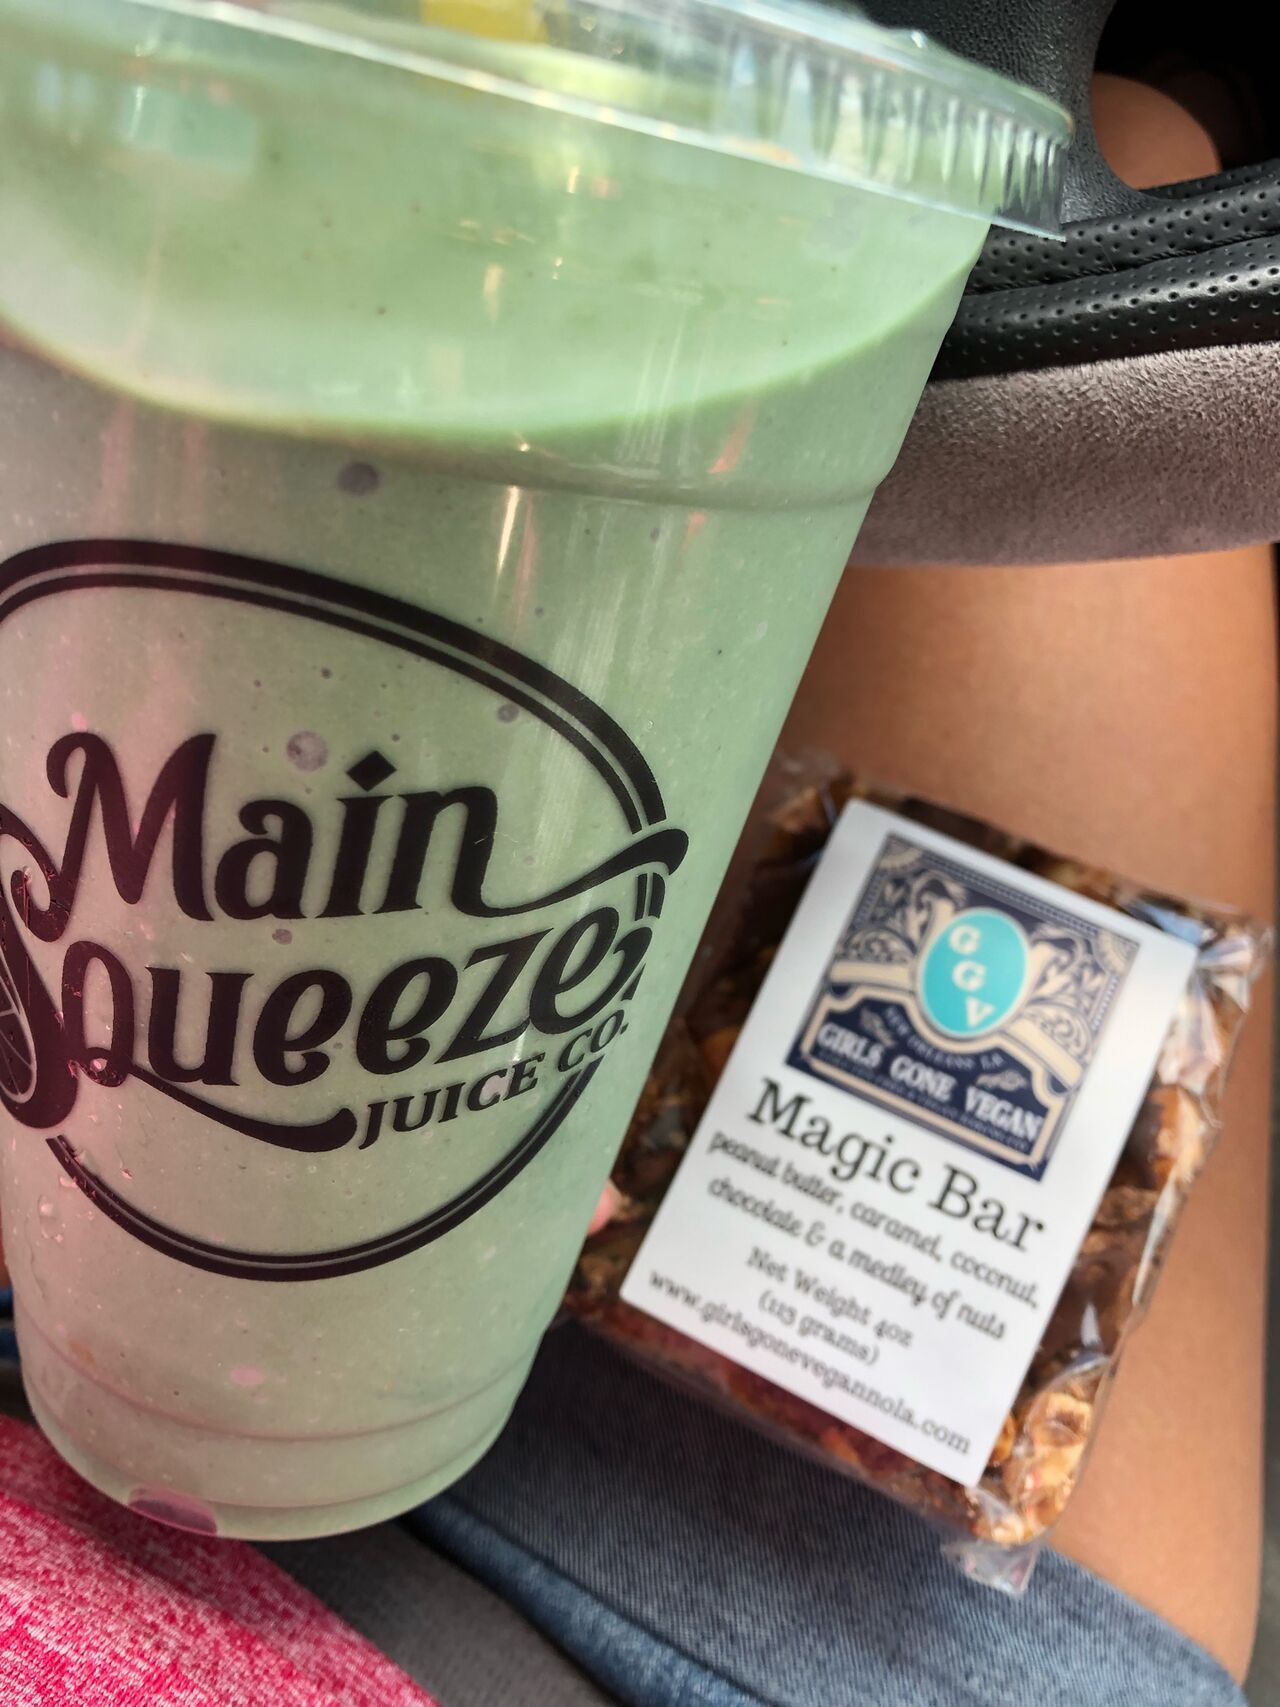 A photo of Main Squeeze Juice Co.